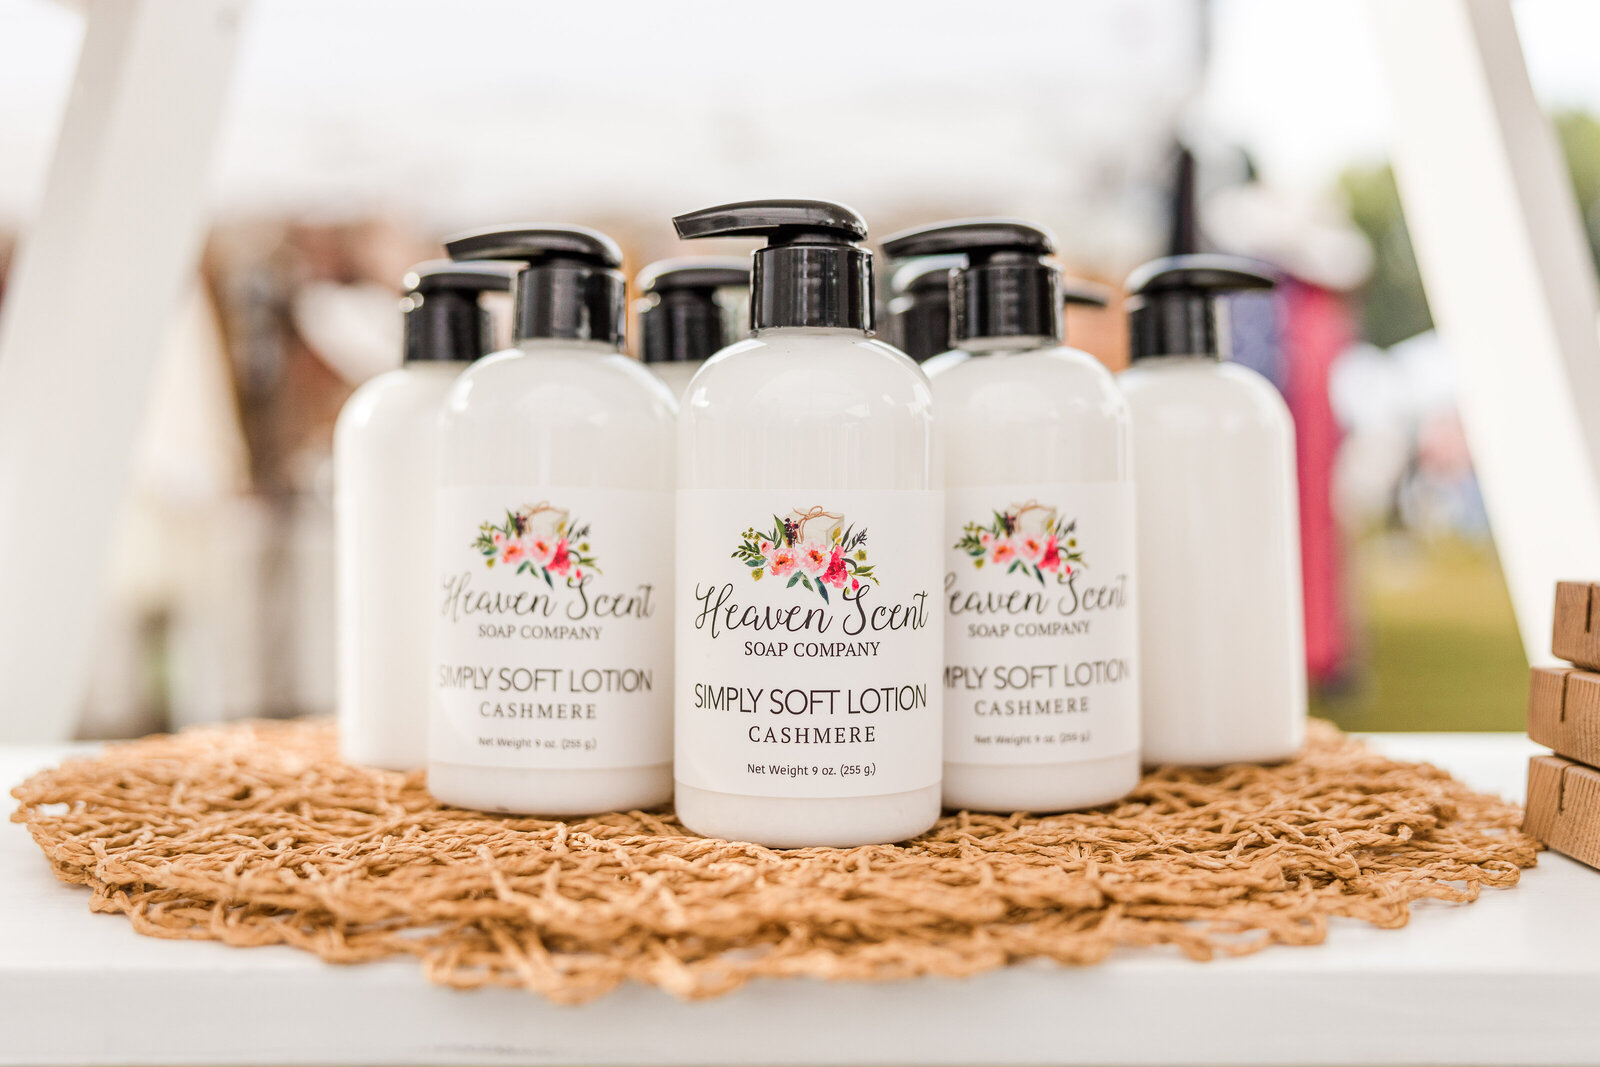 Southern Charm at The Farm Exhibitor 2021 Tanglewood Simply Soft Lotion Heaven Scent Soap Company Tennessee